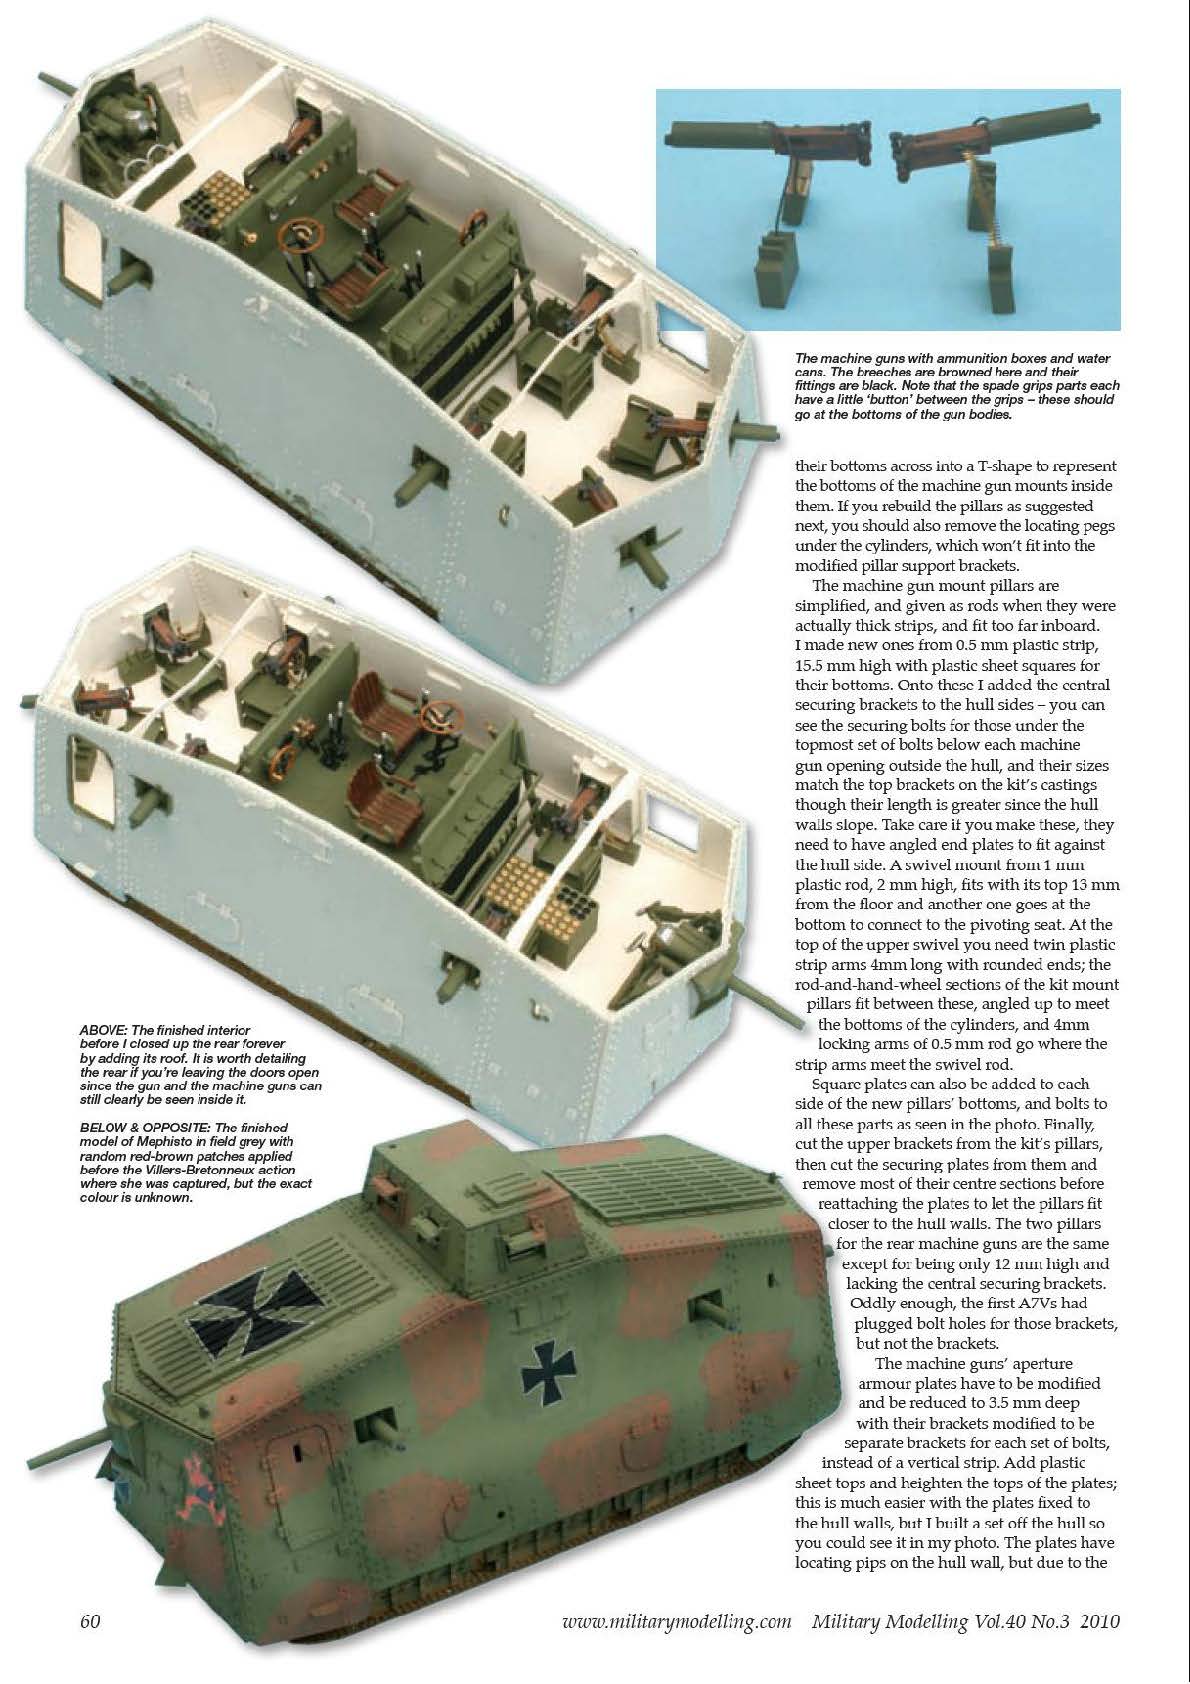 Military Modelling Special Collectors` Edition Nine (Vol.40 Iss.3) [2010]-2_Страница_05.jpg